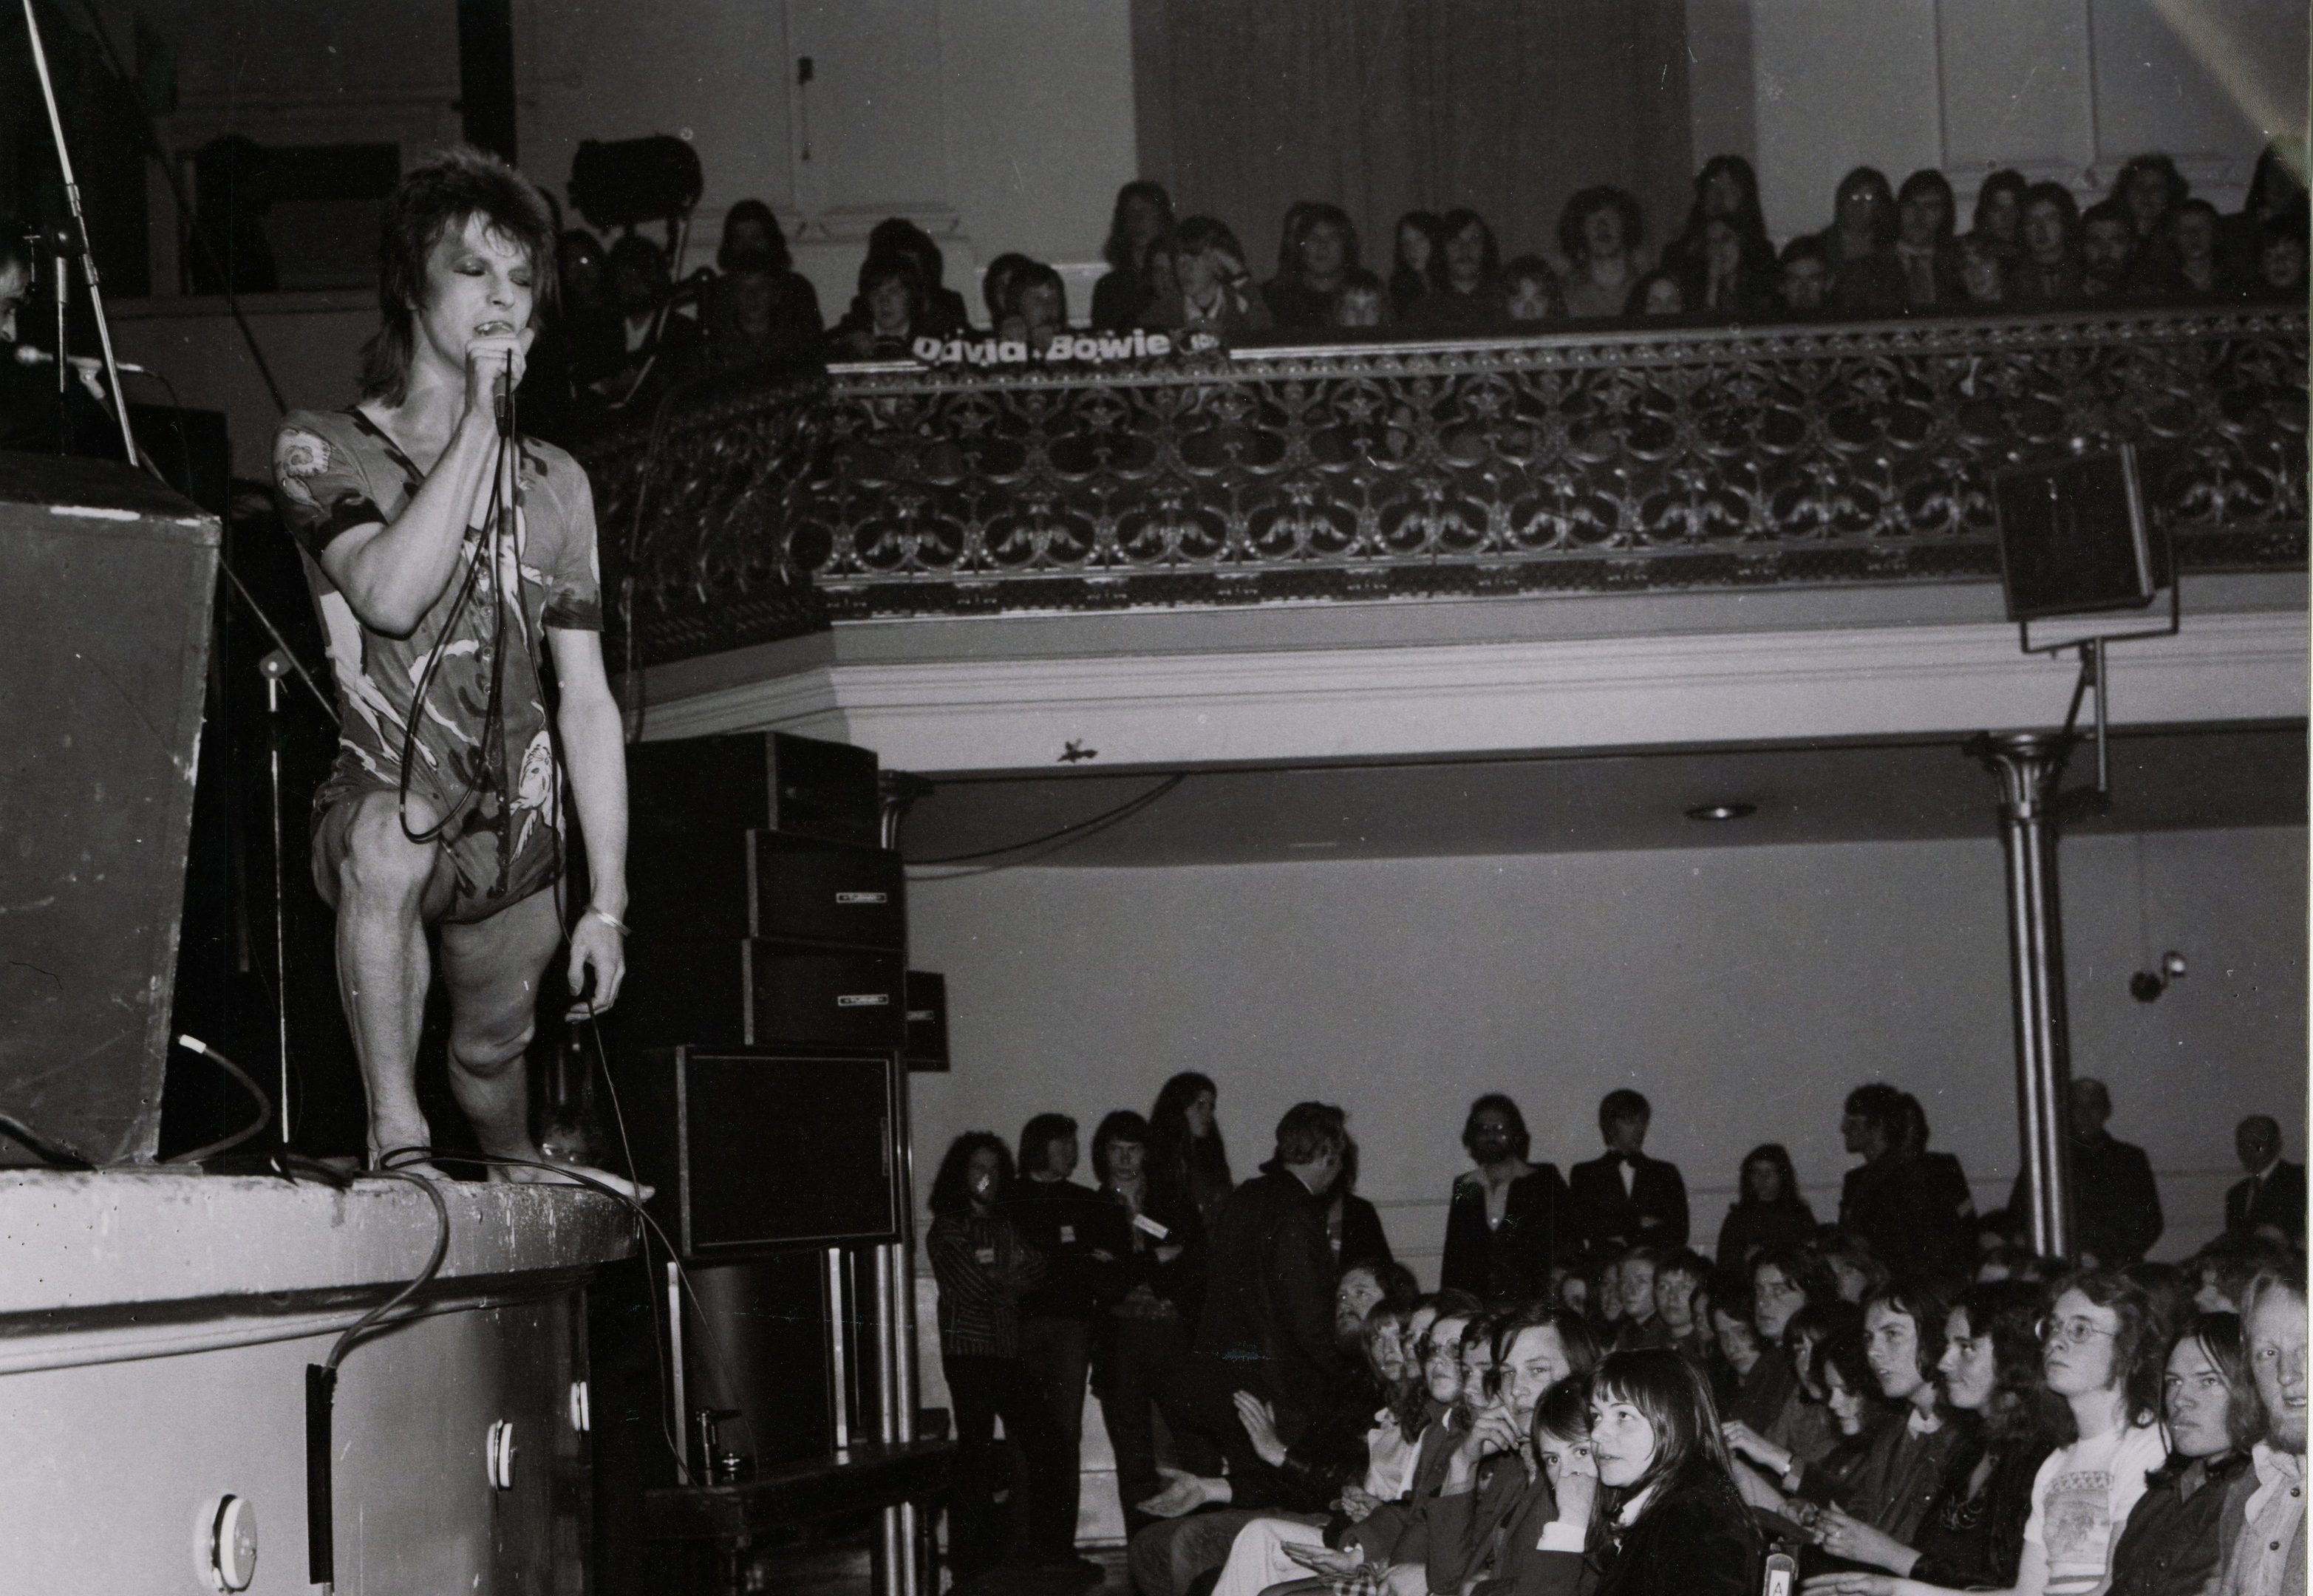 David Bowie in Ziggy Stardust guise tries to win over a rather sceptical Aberdeen audience at the Music Hall in 1973." (AJL)